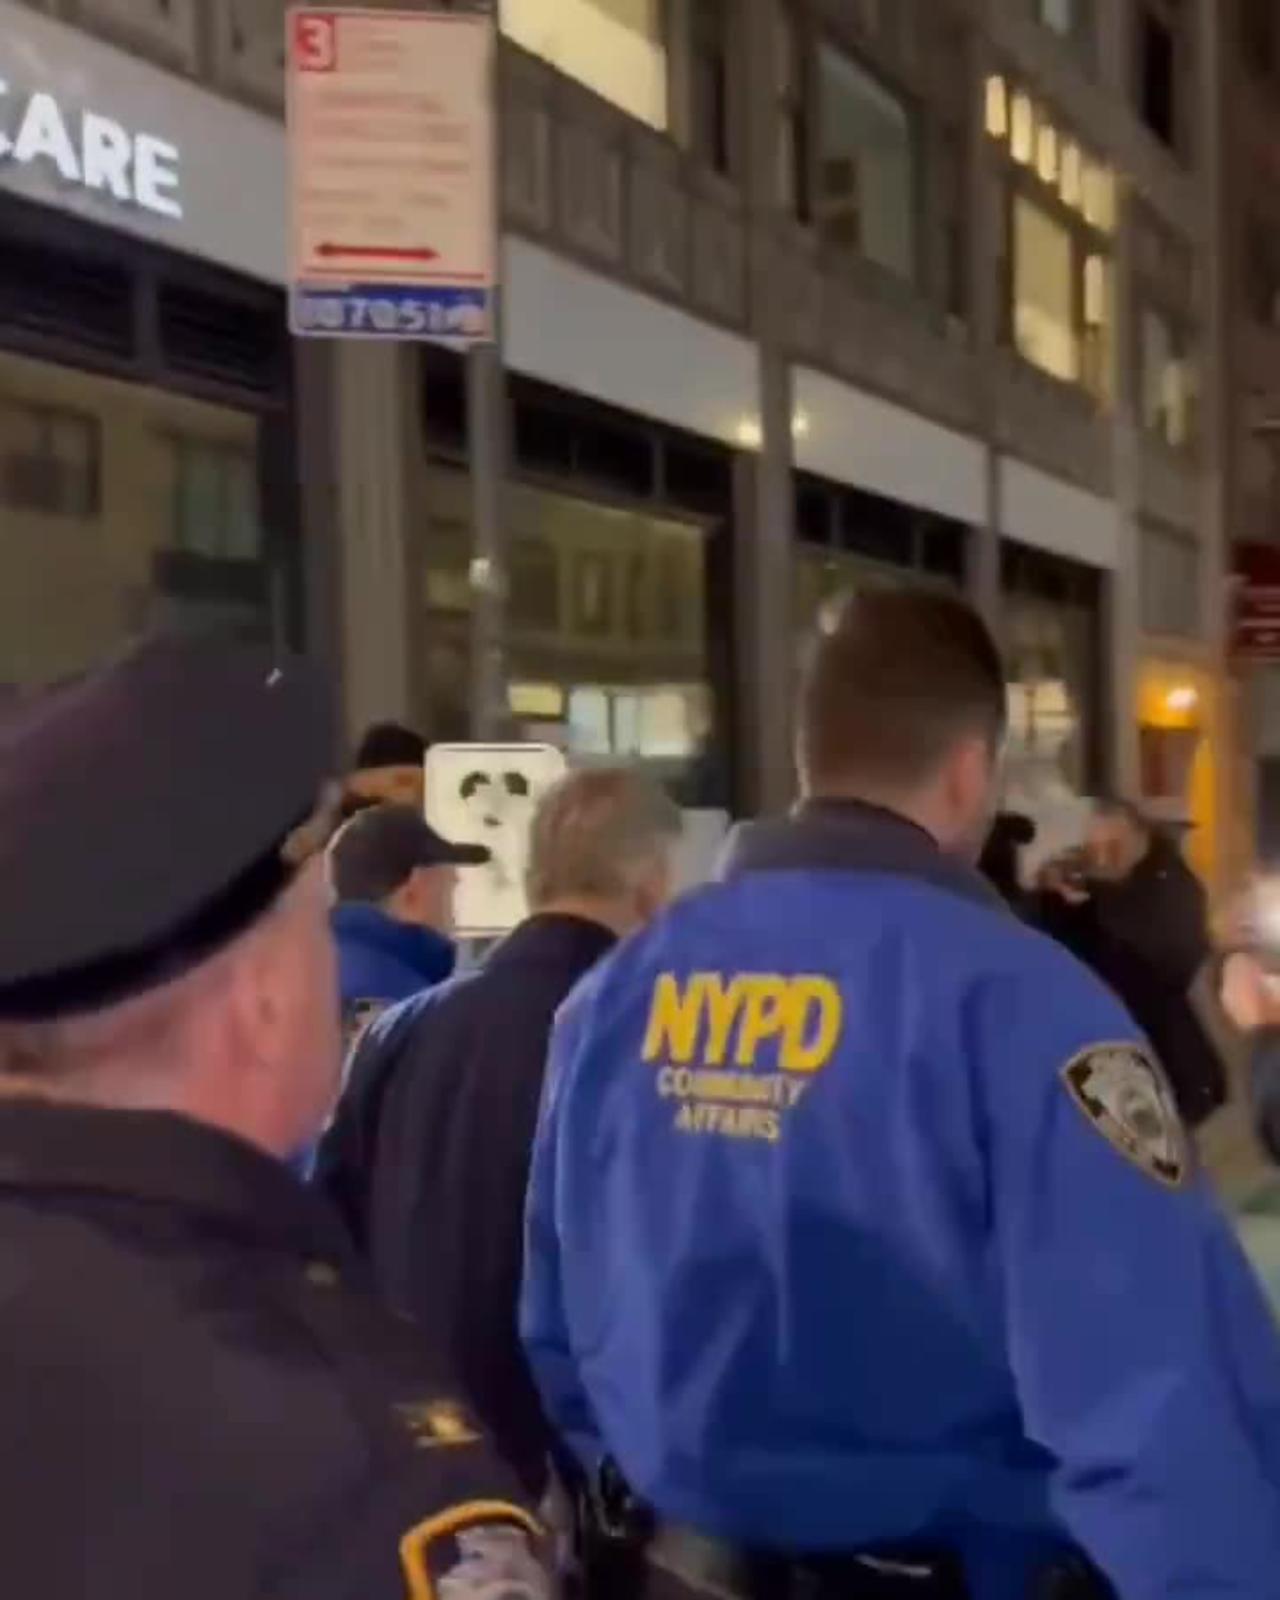 ALEC BALDWIN IS CALLED A “ZIONIST” BY PRO-PALESTINE PROTESTERS FOLLOWING HIM IN NYC